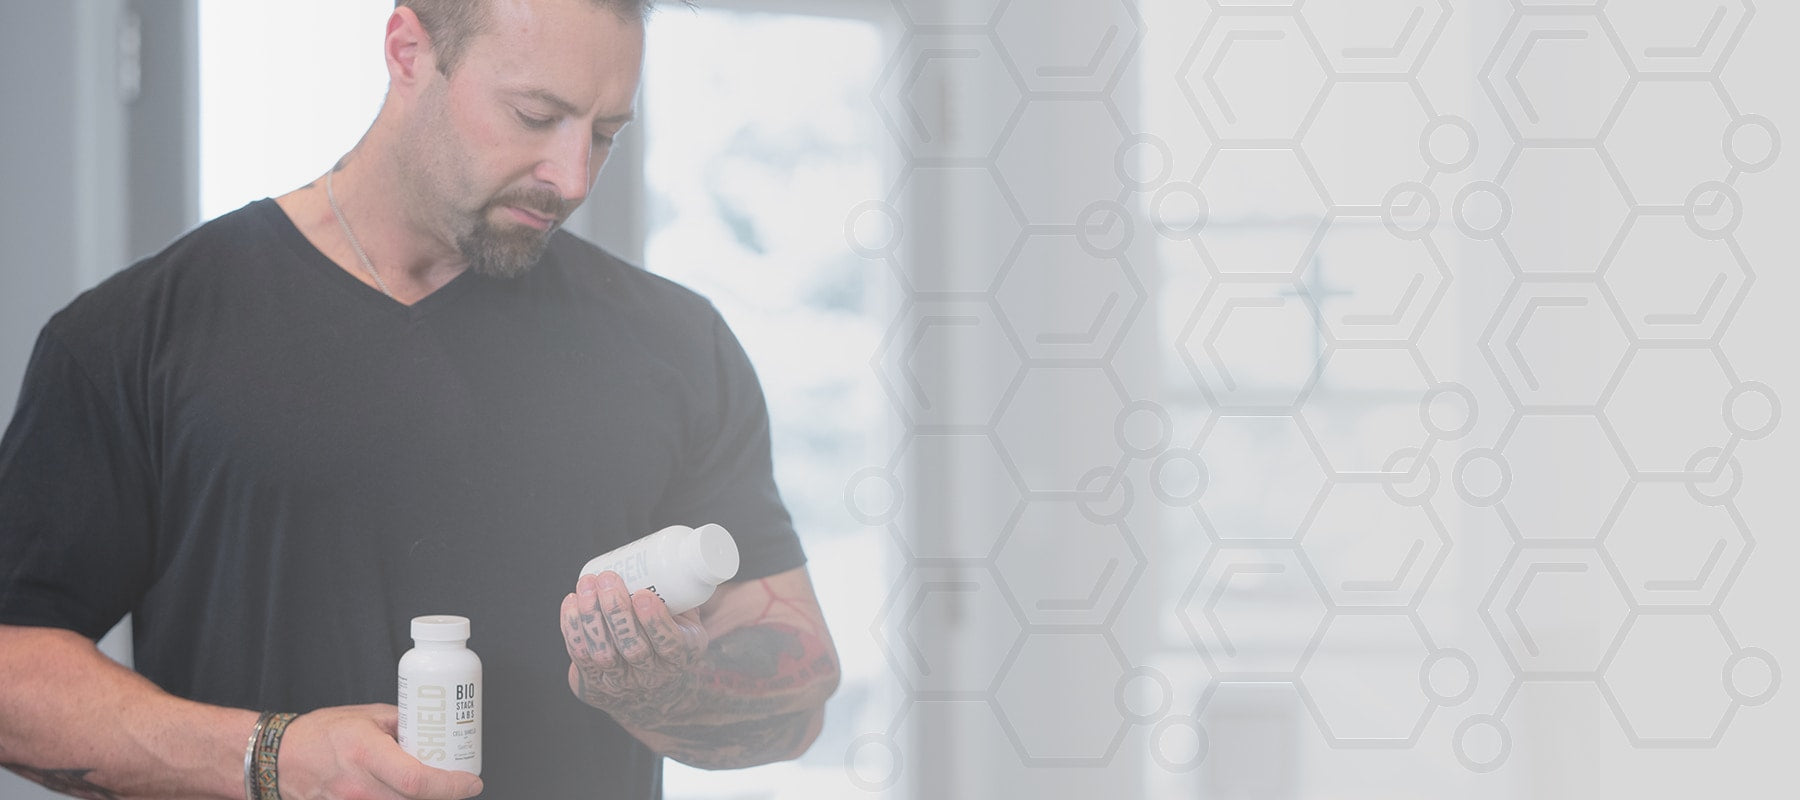 Kris Gethin Cell Shield Review